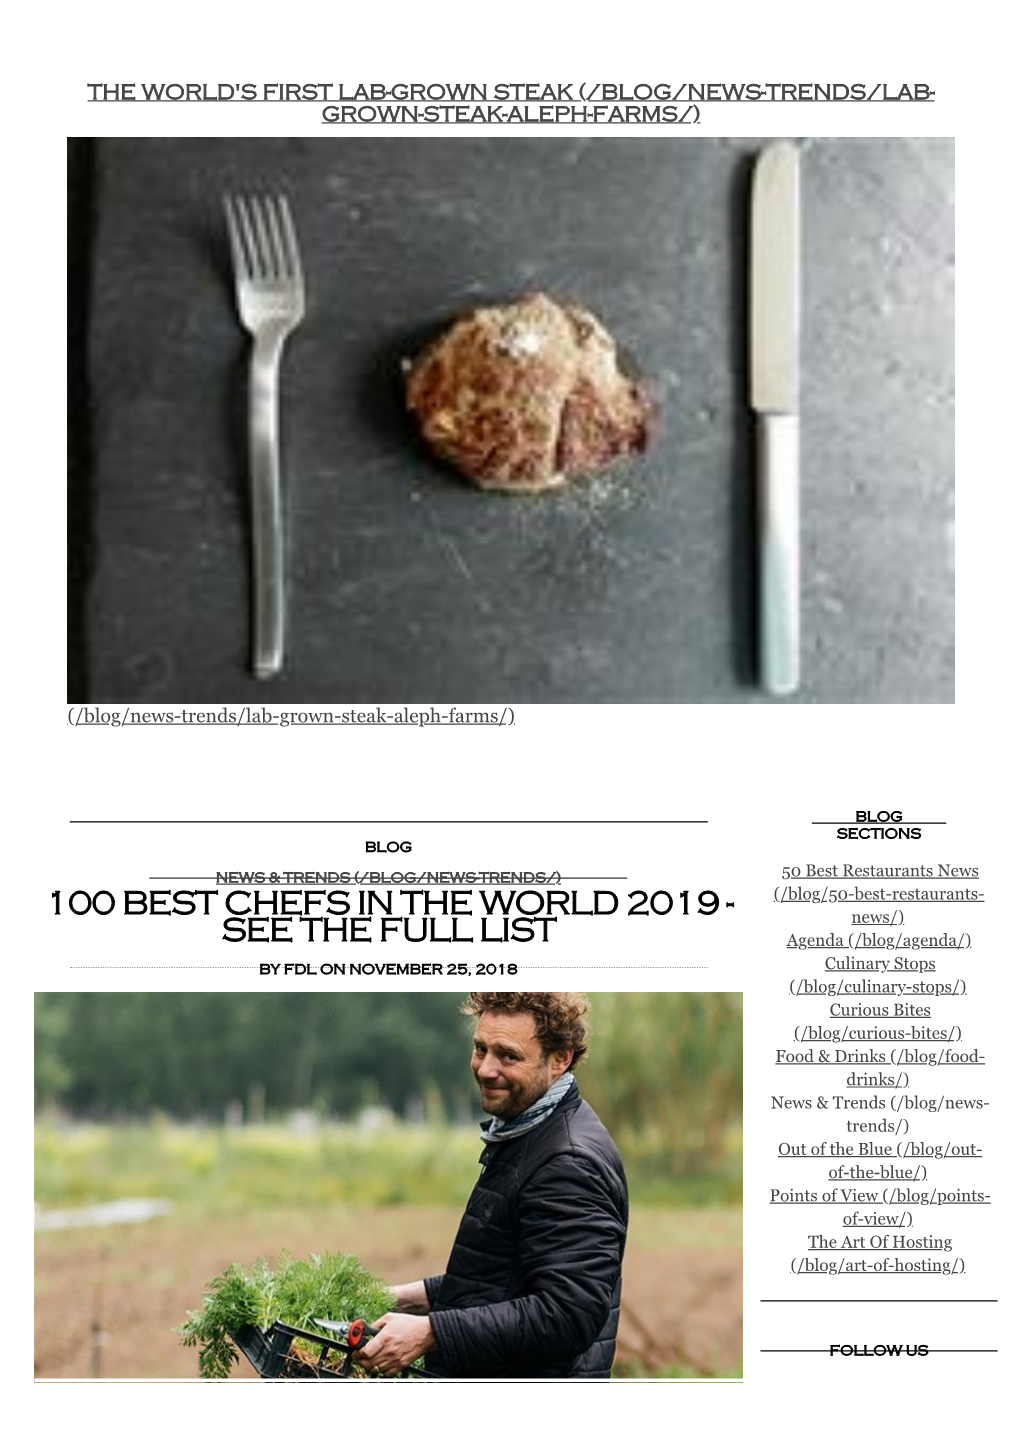 100 Best Chefs in the World 2019